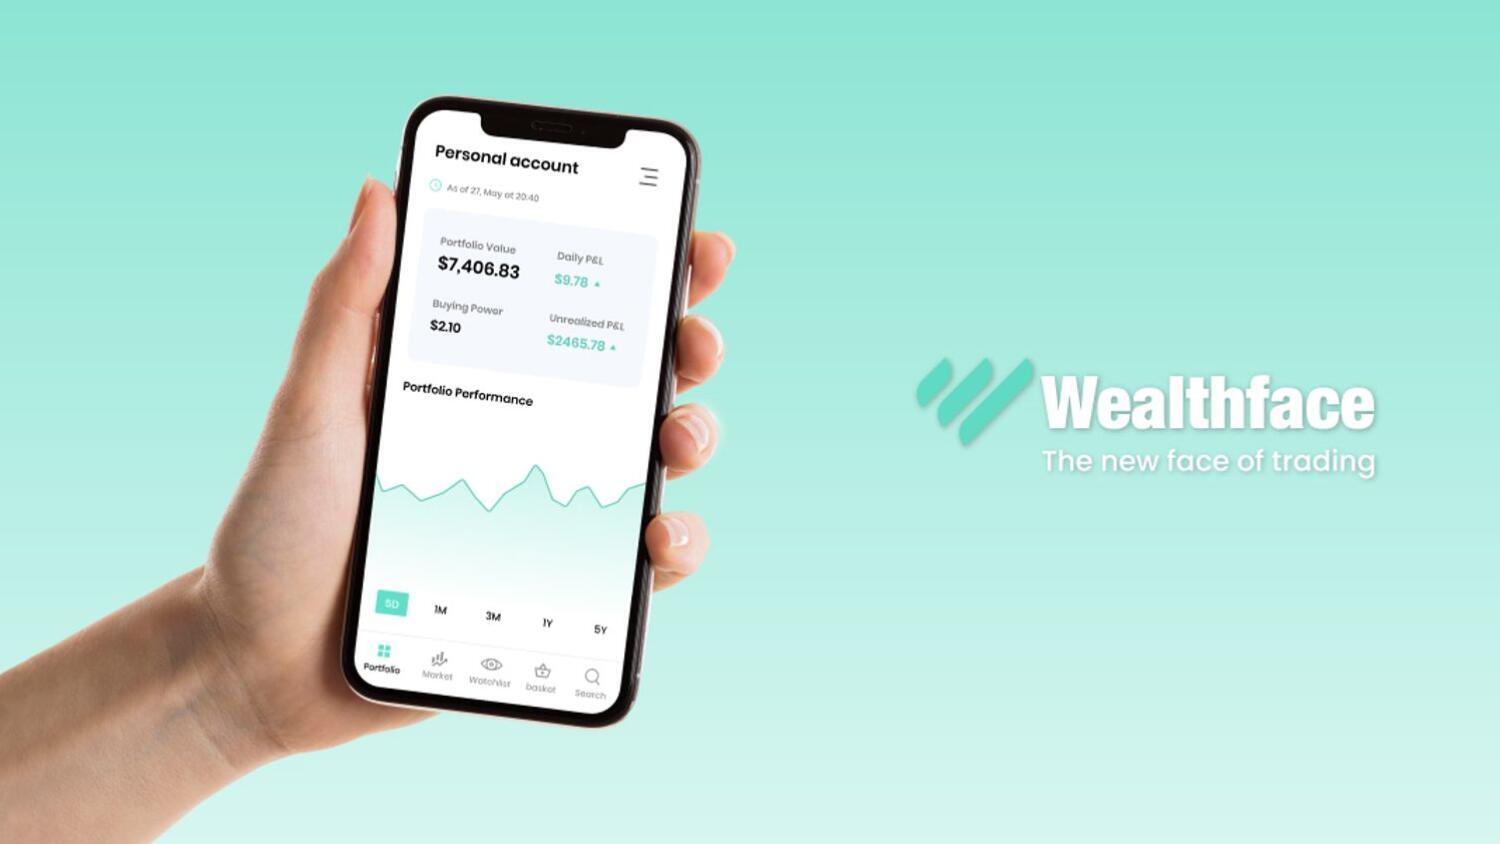 Wealthface empowers people to trade seamlessly